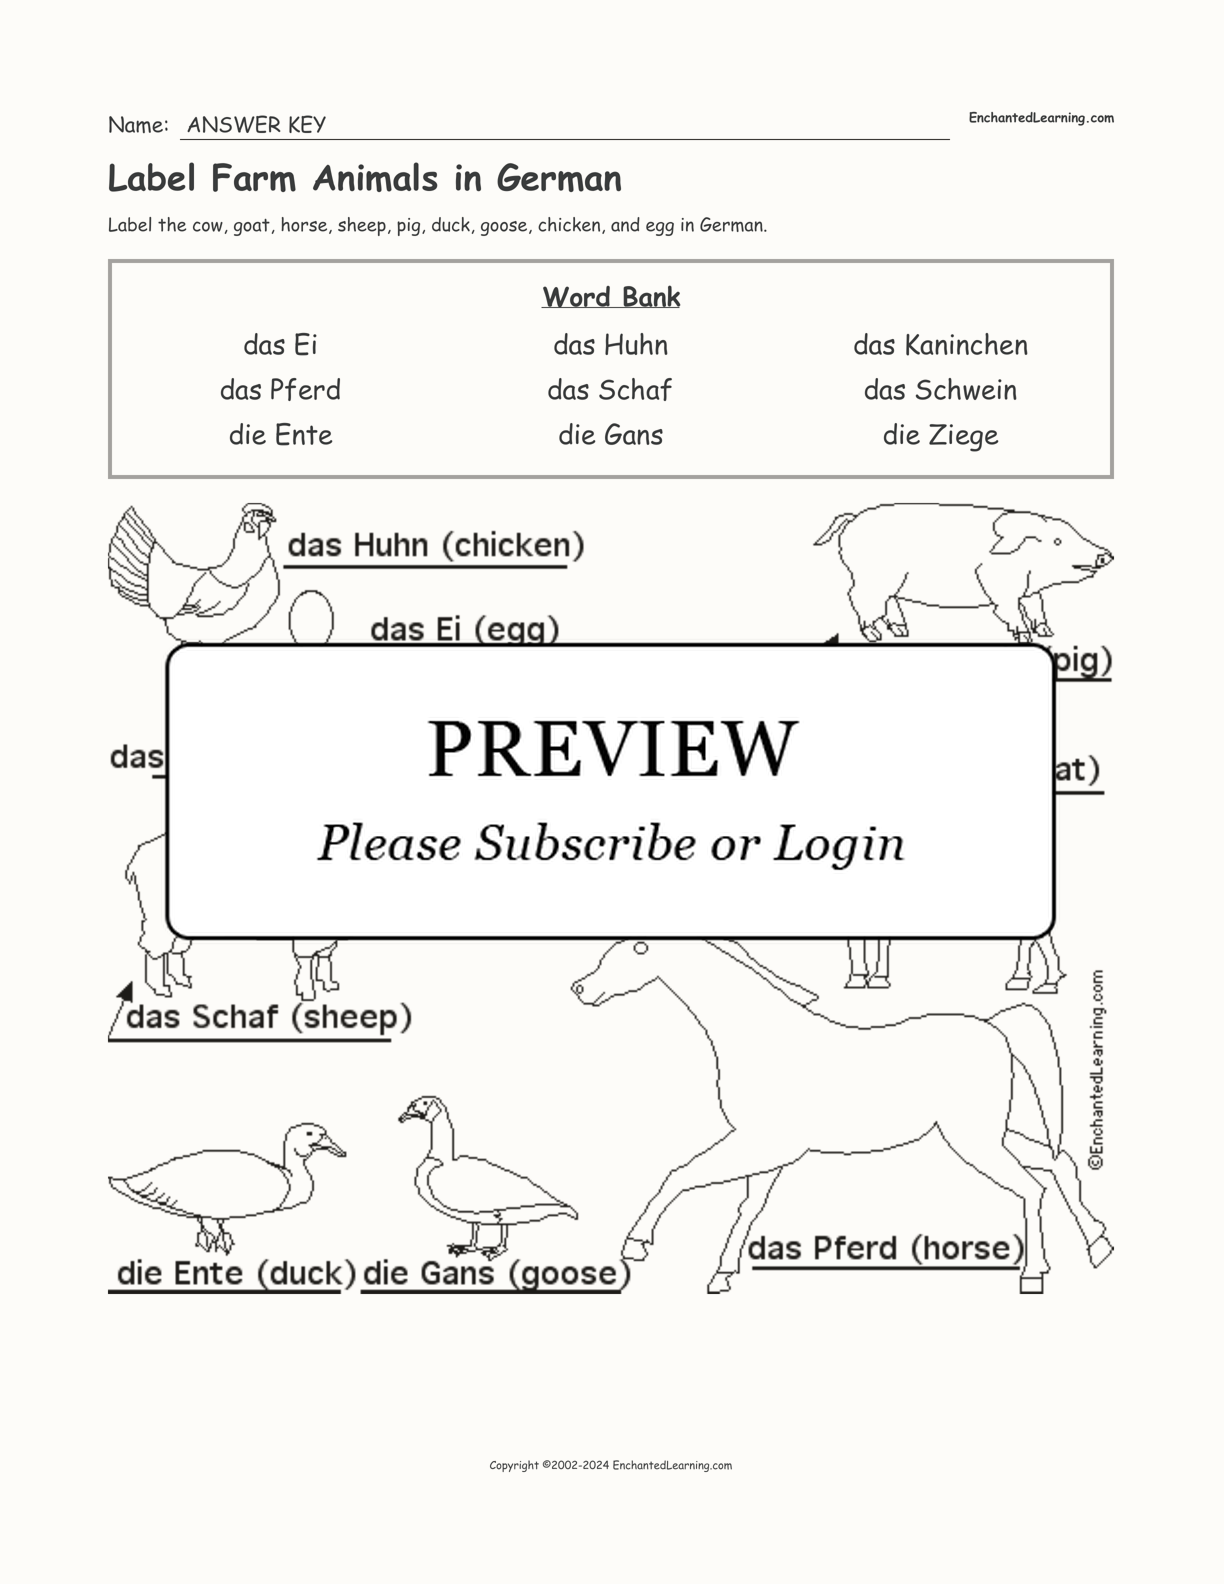 Label Farm Animals in German interactive worksheet page 2